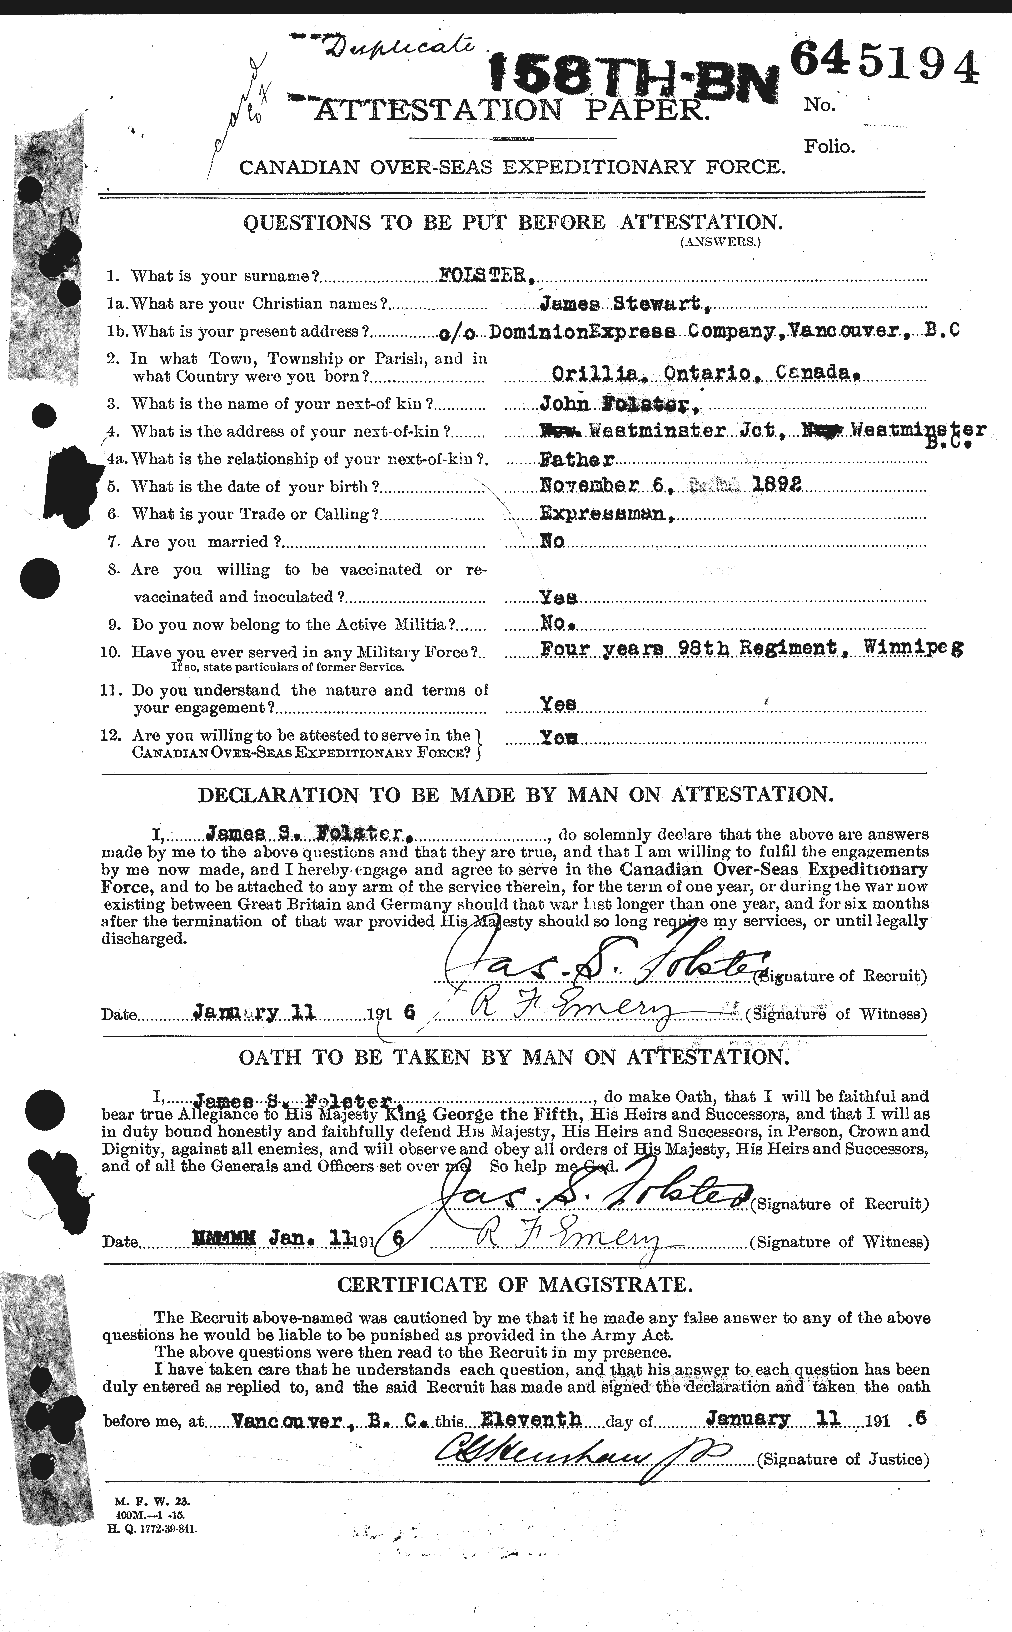 Personnel Records of the First World War - CEF 327740a